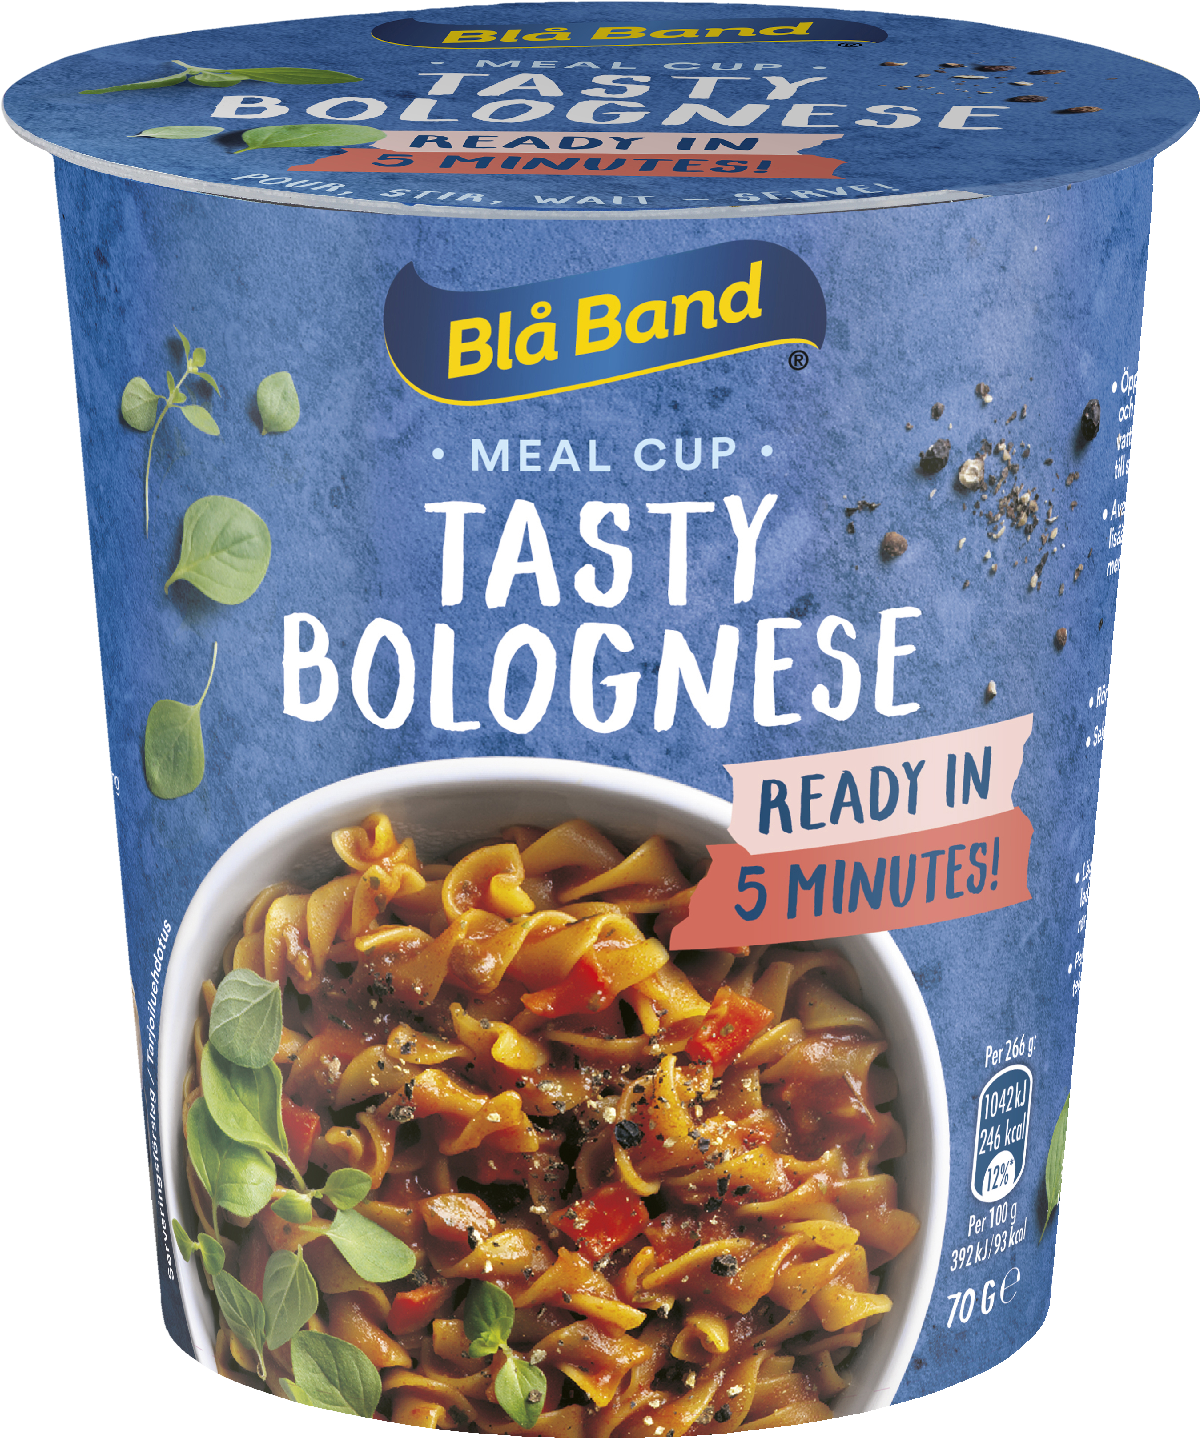 Blå Band Meal Cup Tasty Bolognese pasta-ateria 70g